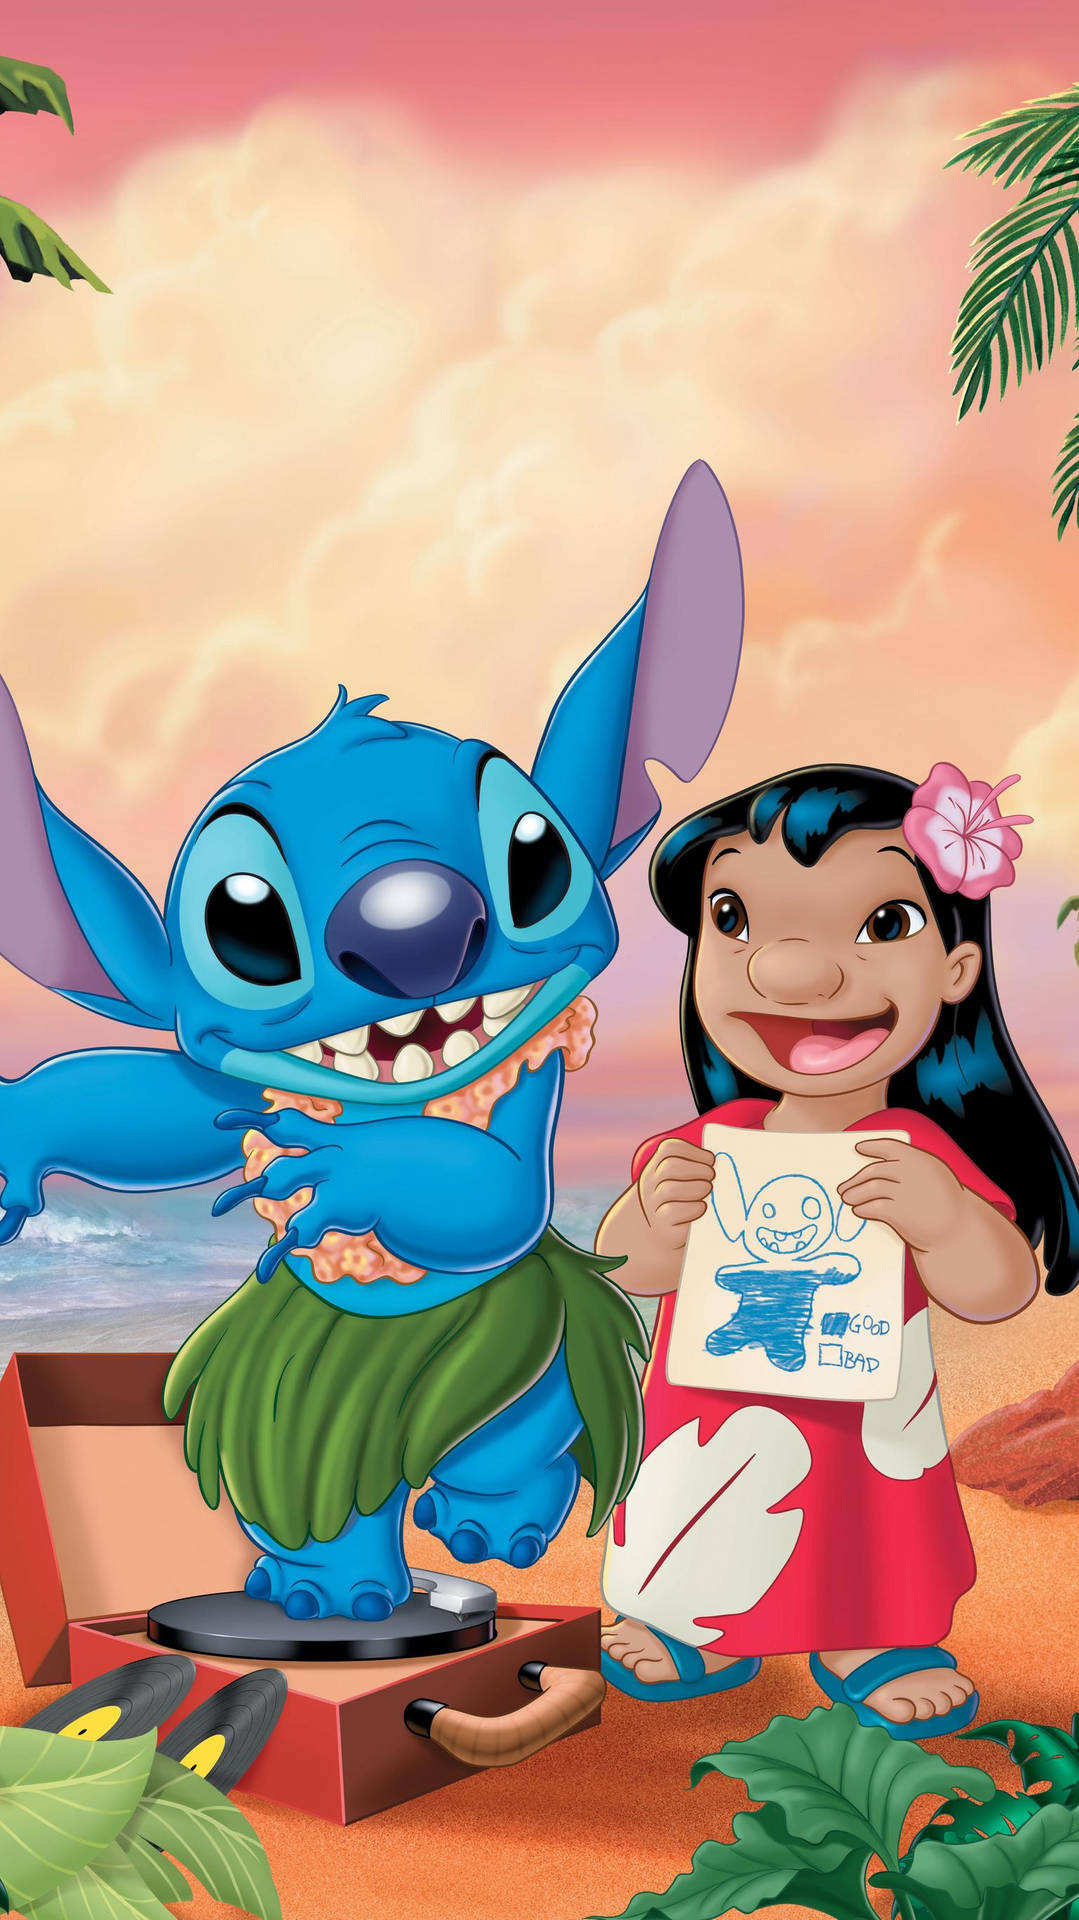 Top 999+ Lilo And Stitch Wallpaper Full HD, 4K✅Free to Use